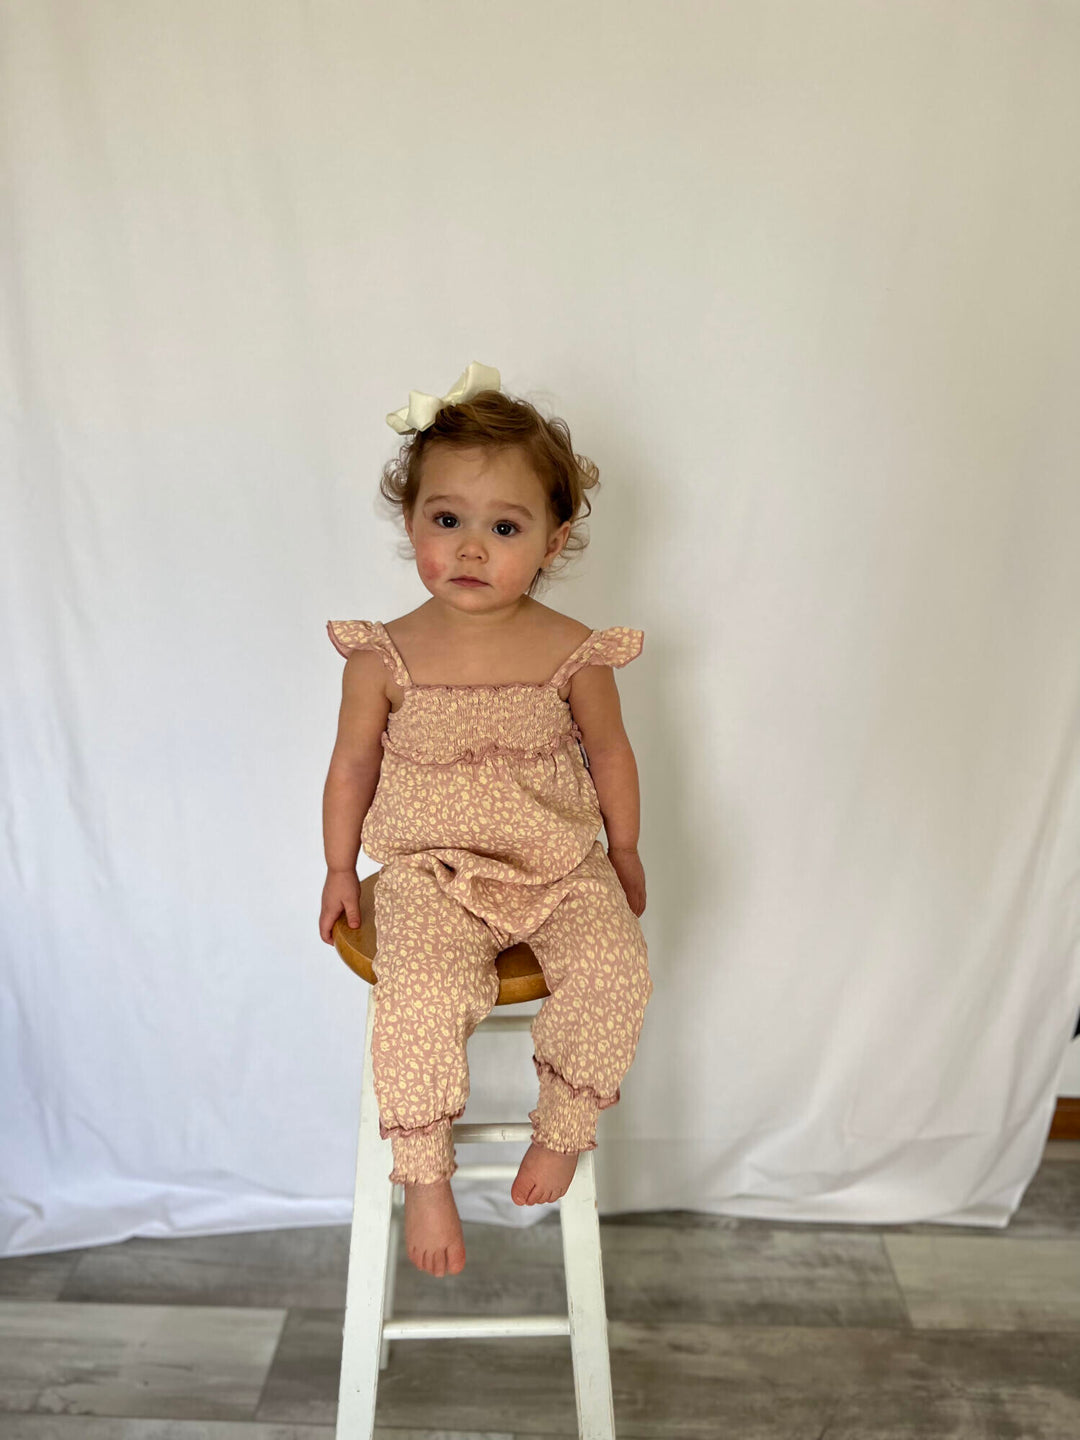 Child wearing Printed Muslin Sleeveless Romper in Carnation Floral.